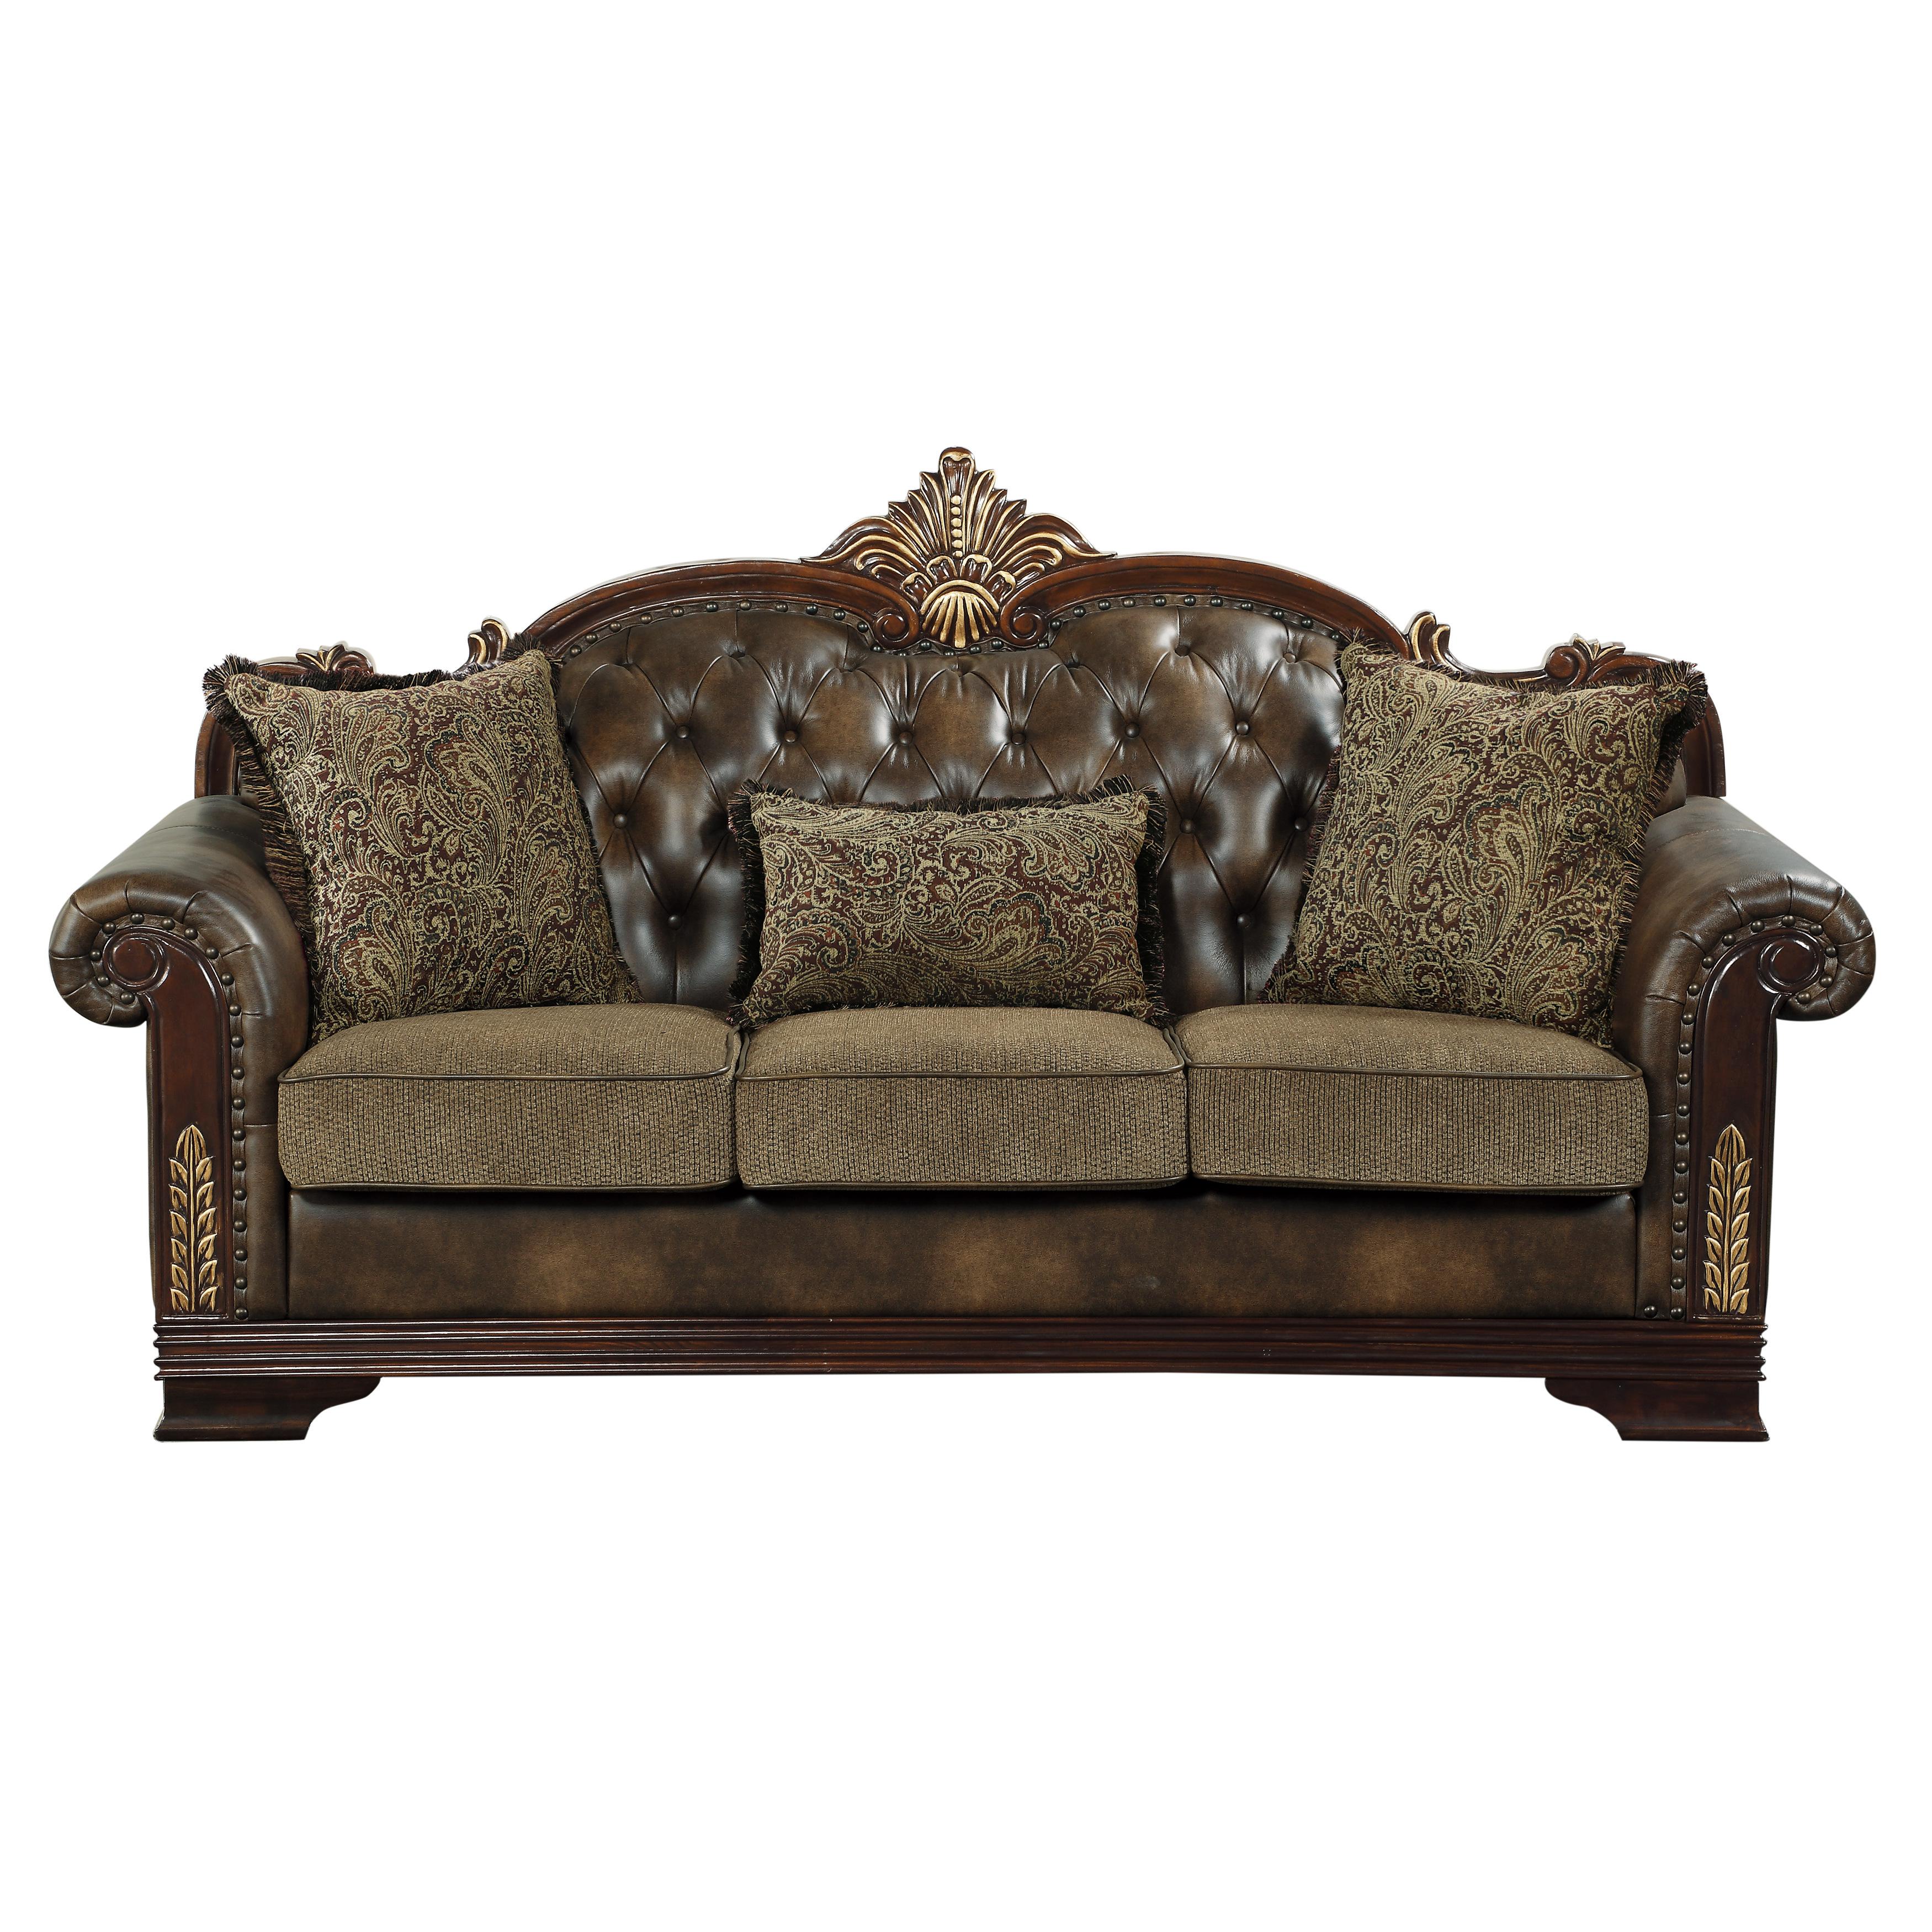 Traditional Sofa 9815-3* Croydon 9815-3* in Brown Faux Leather